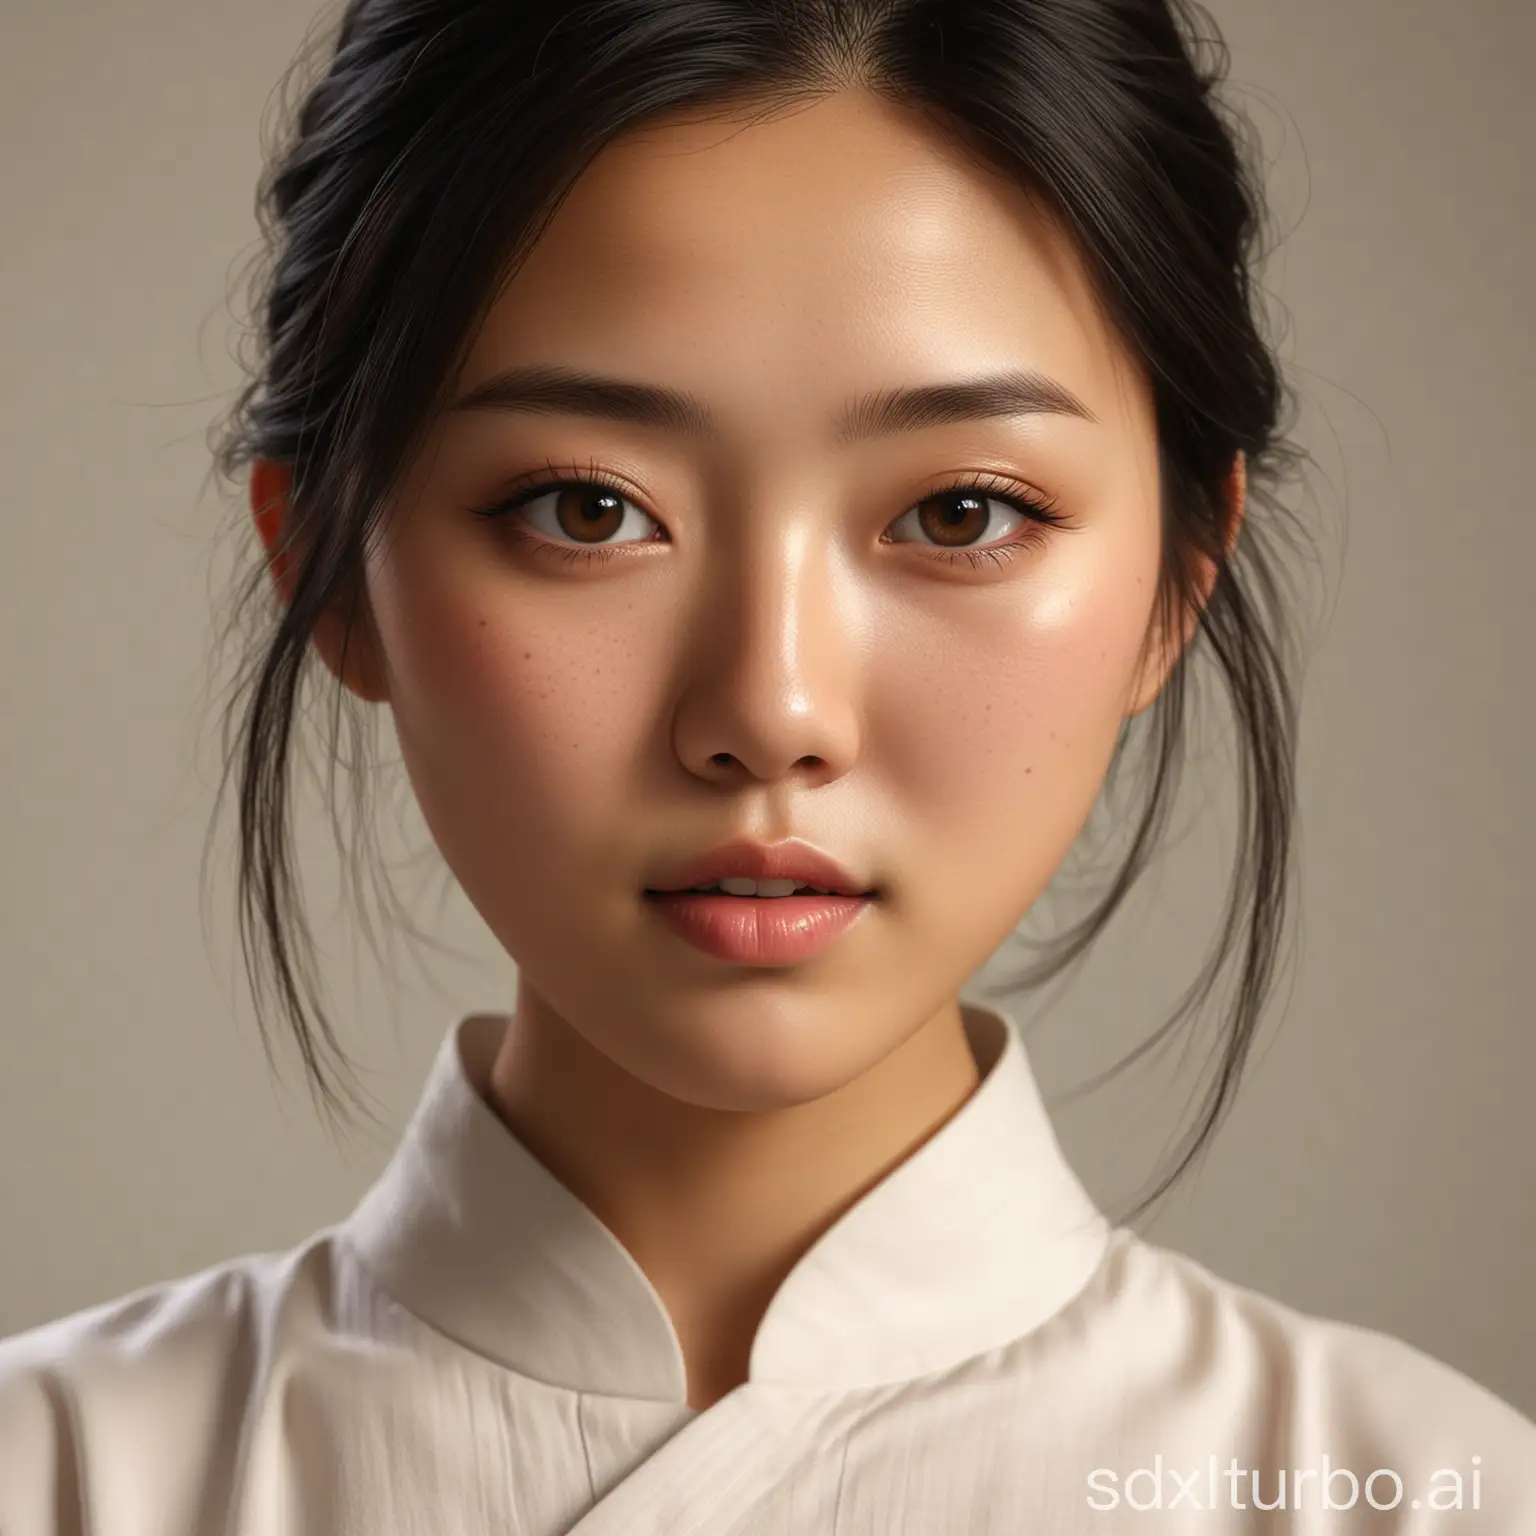 Hyperrealistic-HalfBody-Portrait-of-Asian-Girl-with-Authentic-Lighting